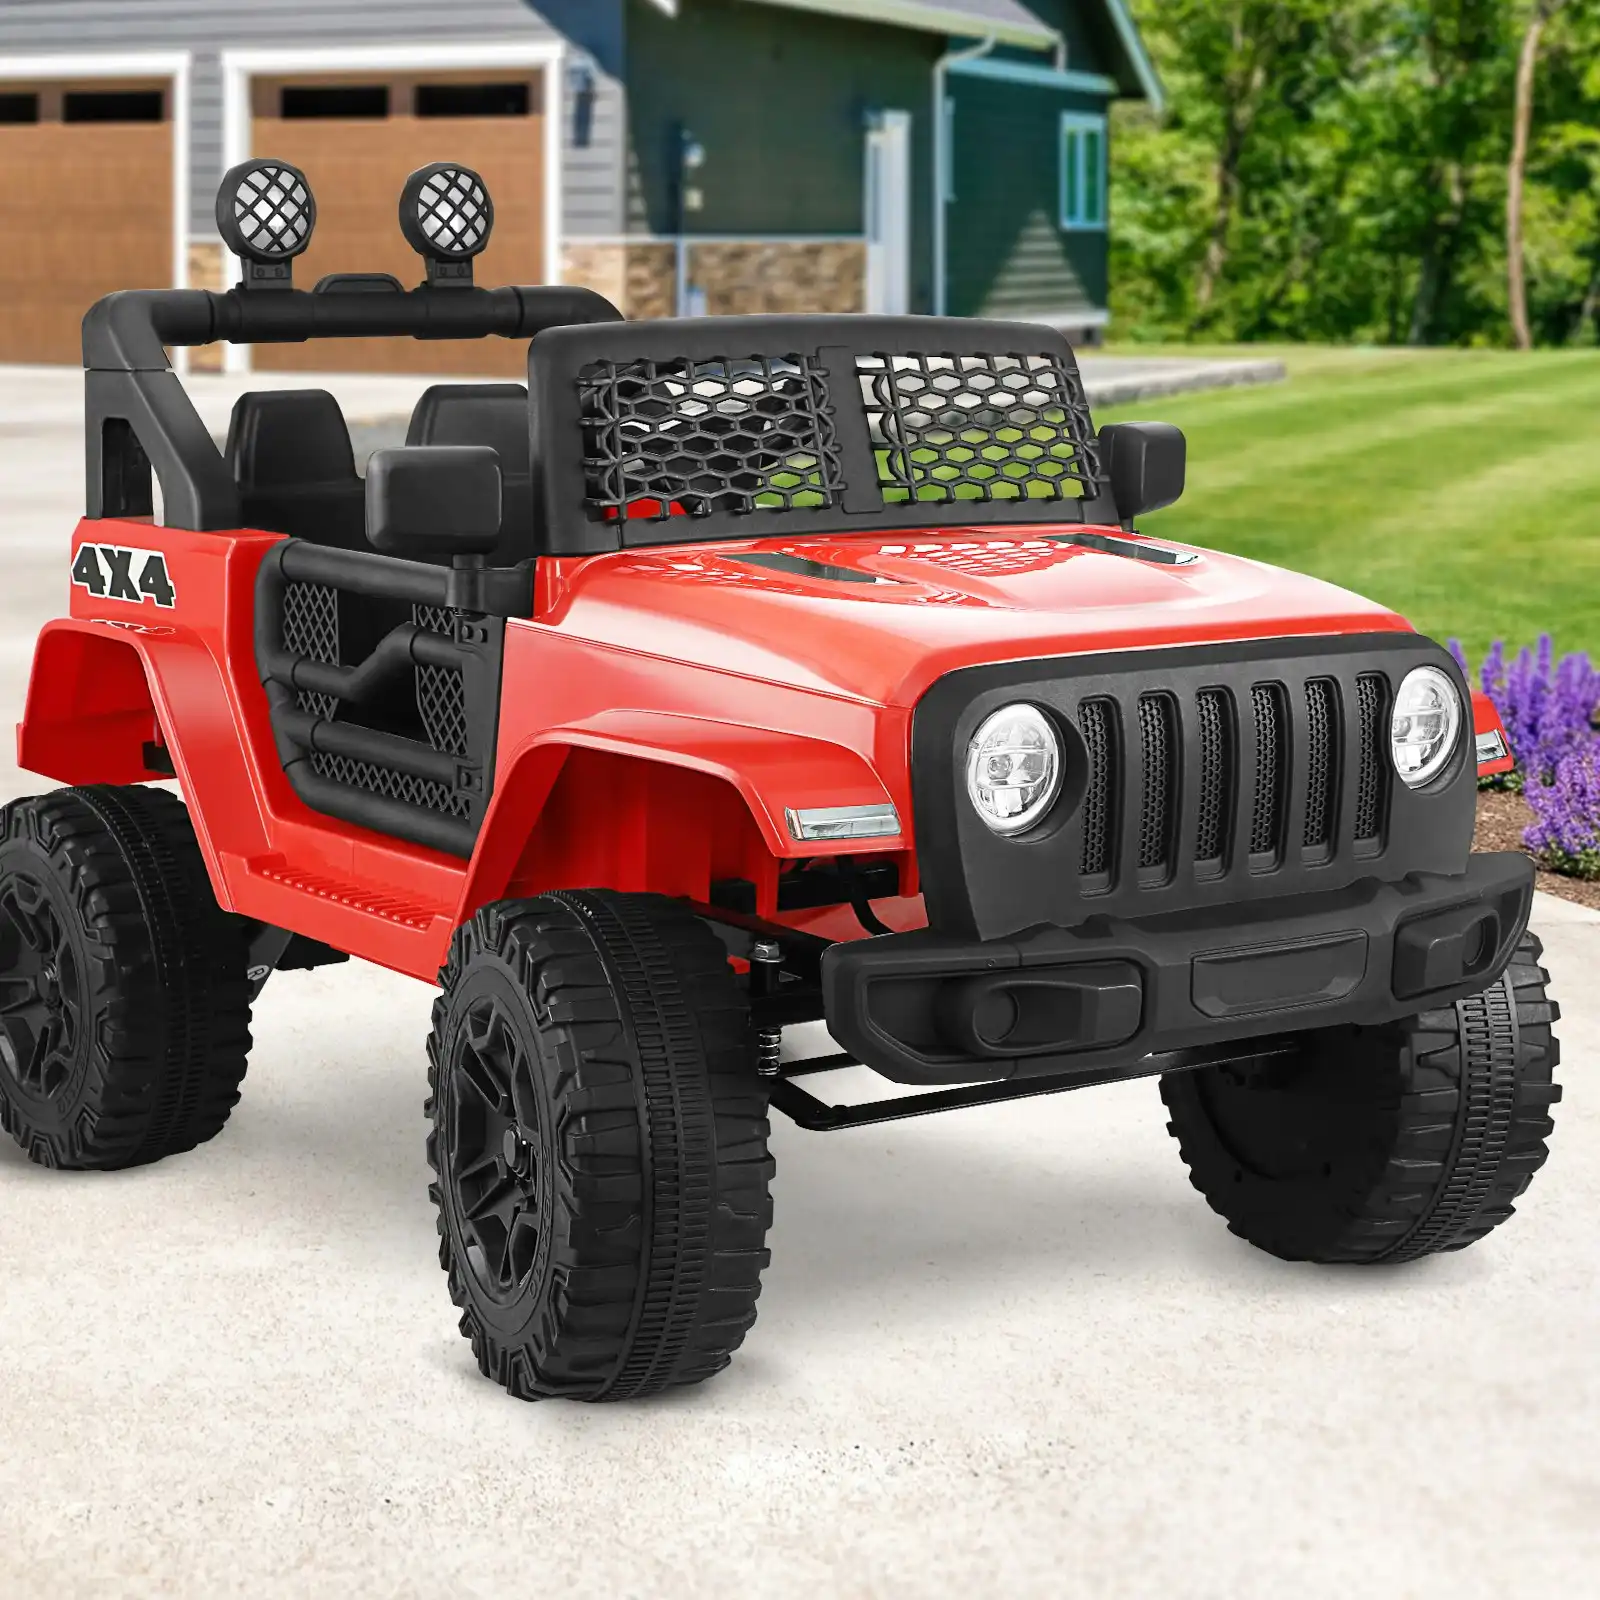 Mazam Ride On Car Red Electric Jeep Toy Remote Cars Kids Gift MP3 LED lights 12V